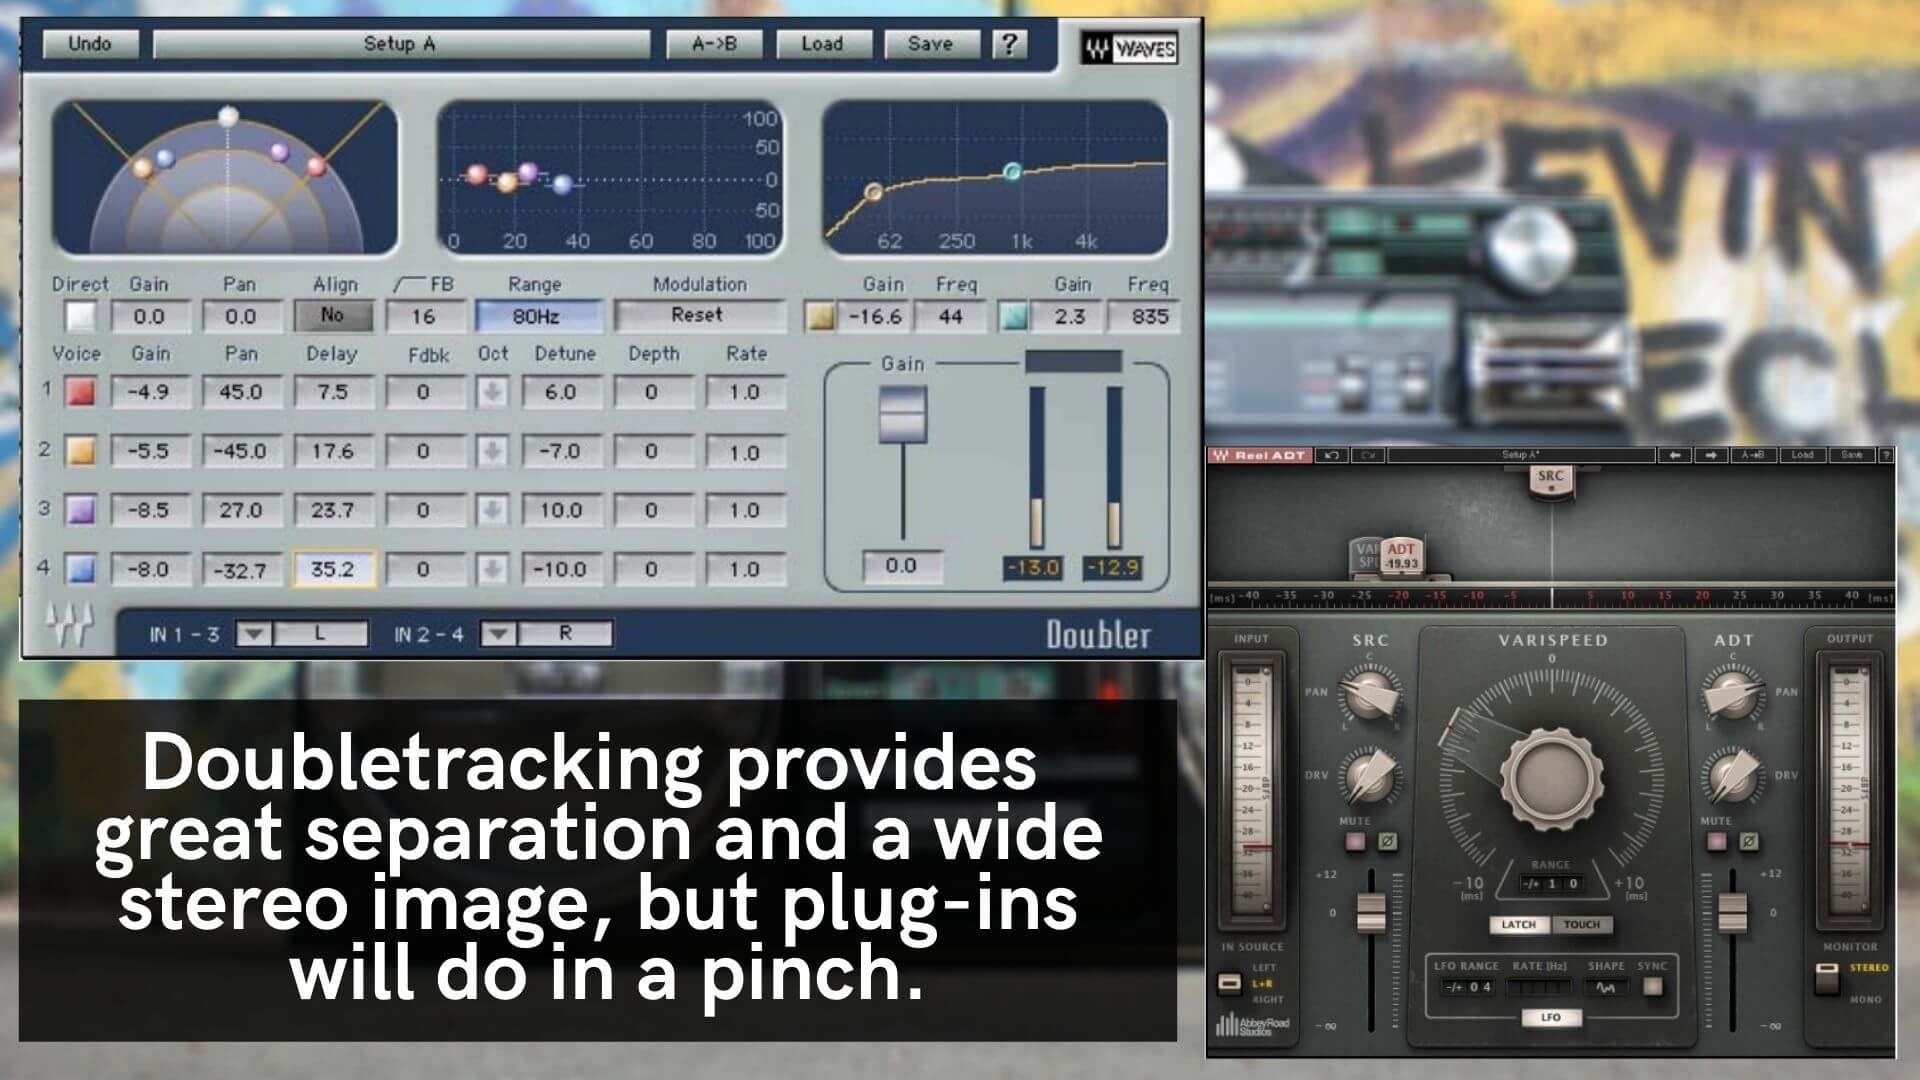 Doubletracking